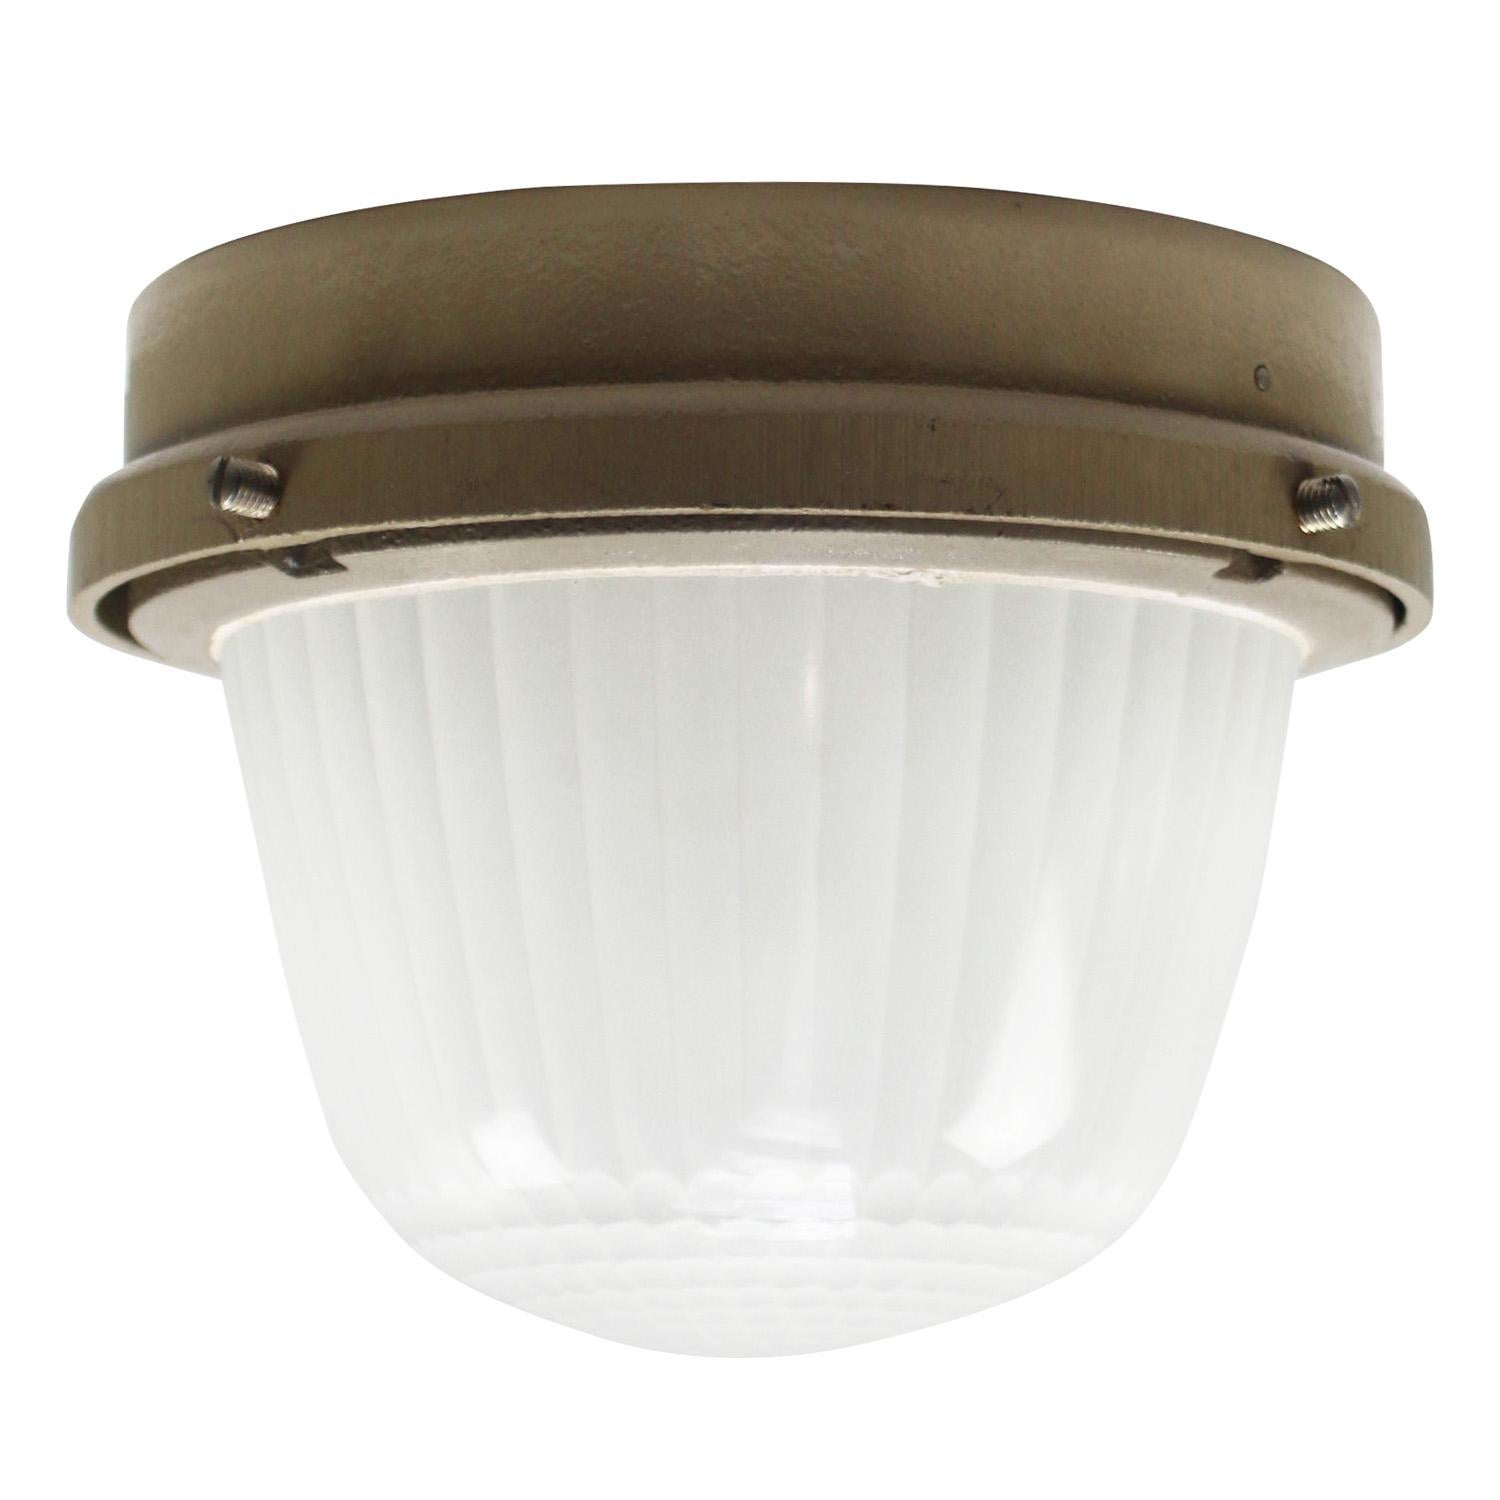 French Industrial wall / ceiling lamp by Holophane, France, model CE100
Beige cast iron with frosted cut glass.

Weight : 4.10 kg / 9 lb

Priced per individual item. All lamps have been made suitable by international standards for incandescent light